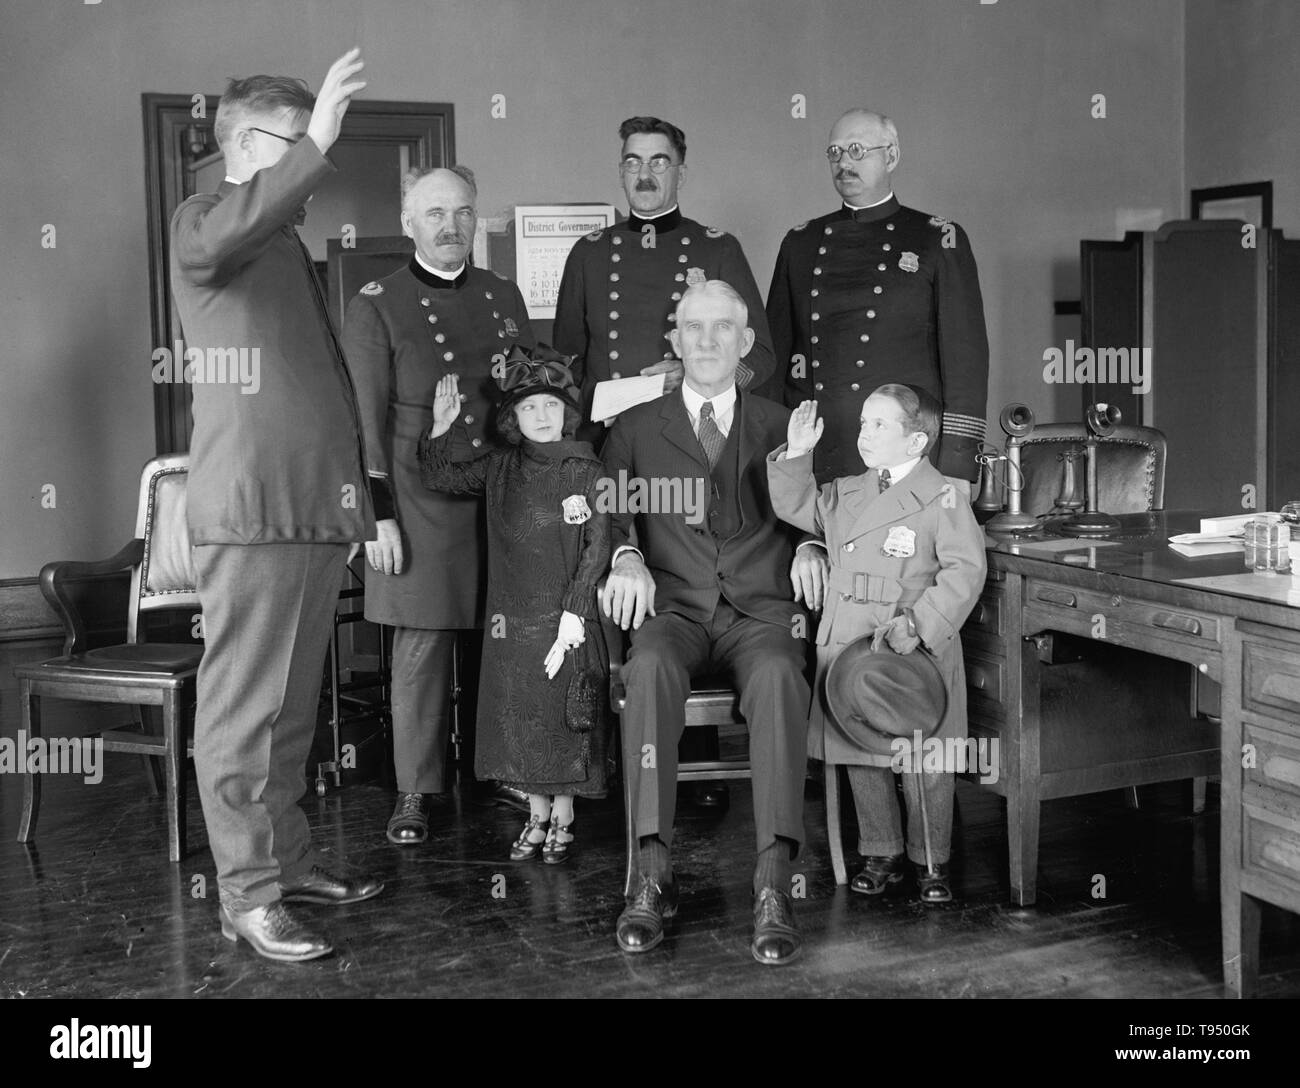 Entitled: 'Police Department swears in Singer midgets, Louis Vasshek & Dora Vieg.' Singer's Midgets were a popular vaudeville group in the first half of the 20th century. Leopold von Singer (May 3, 1877 - March 5, 1951) formed Singer's Midgets in 1912-13, and built the Liliputstadt, a 'midget city' at the 'Venice in Vienna' amusement park, where they performed. Stock Photo